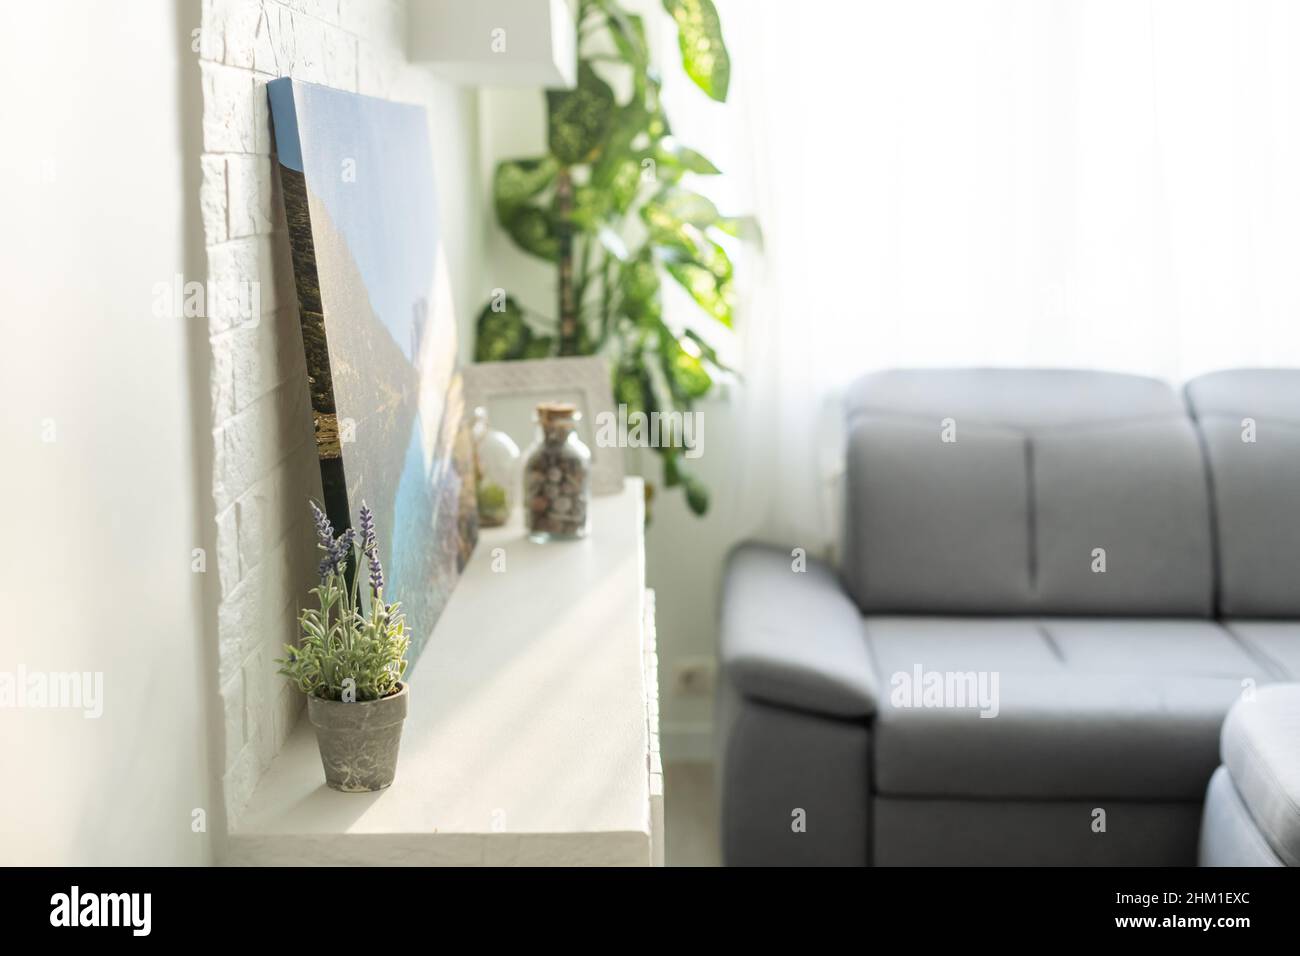 Dieffenbachia or Dumb cane plant in a white flower pot on a white table in daylight room with bookcase, minimalist and scandinavian style. Stock Photo